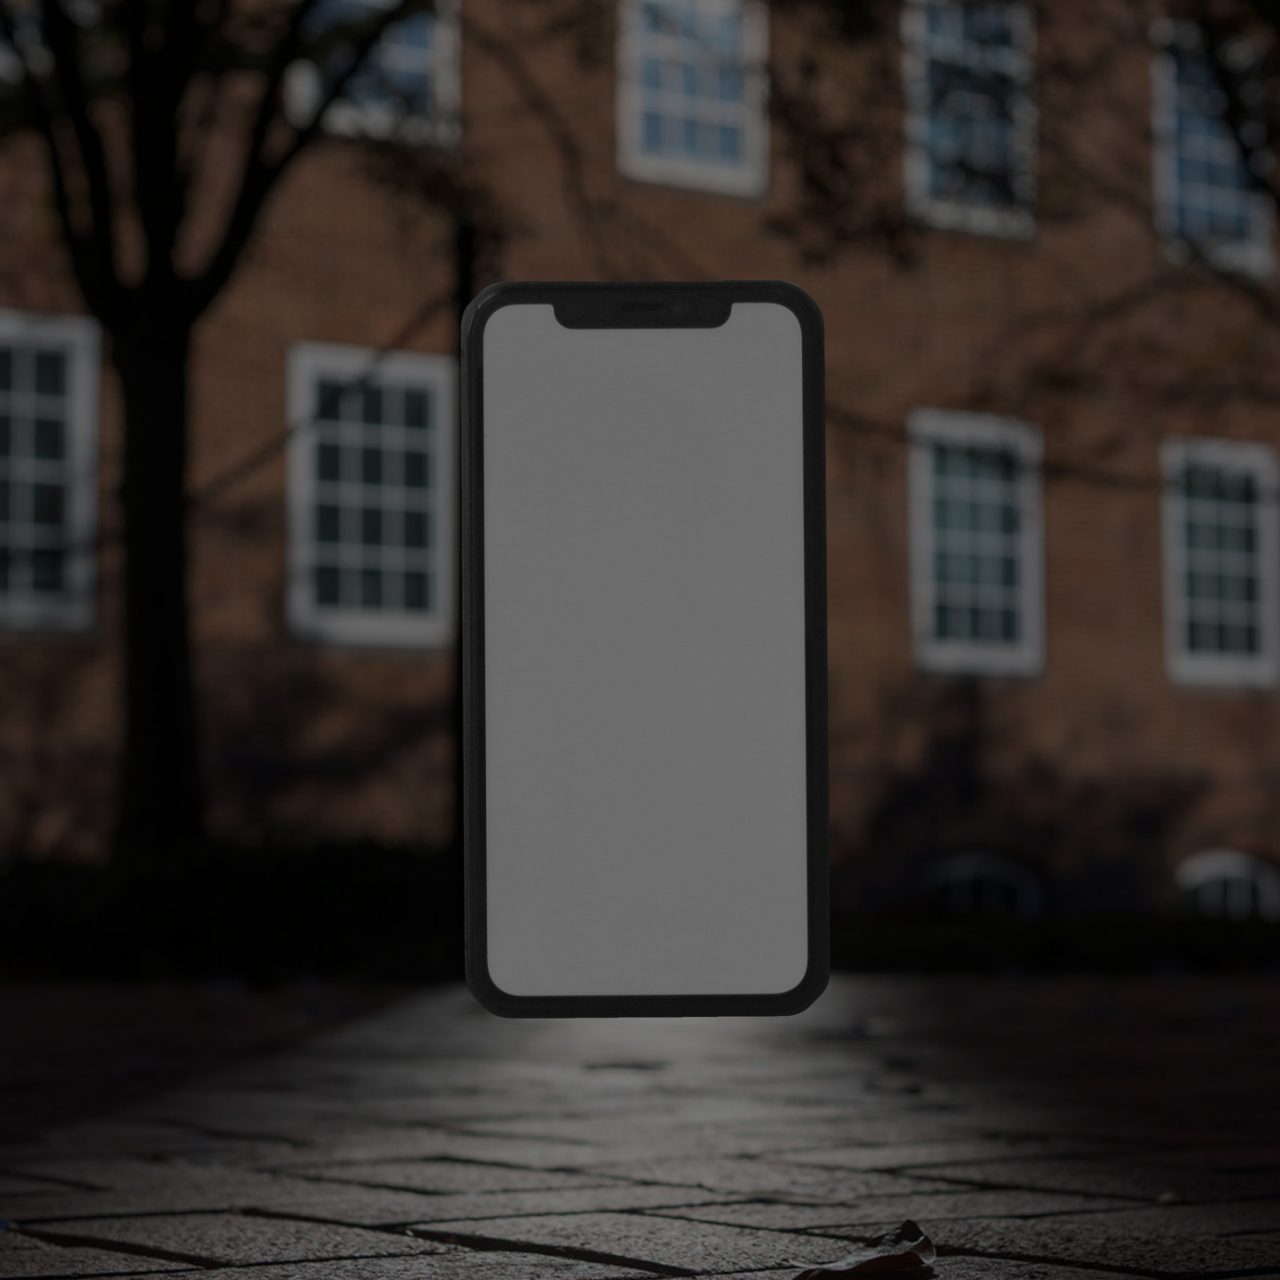 mobile phone against a backdrop of a UD residence hall